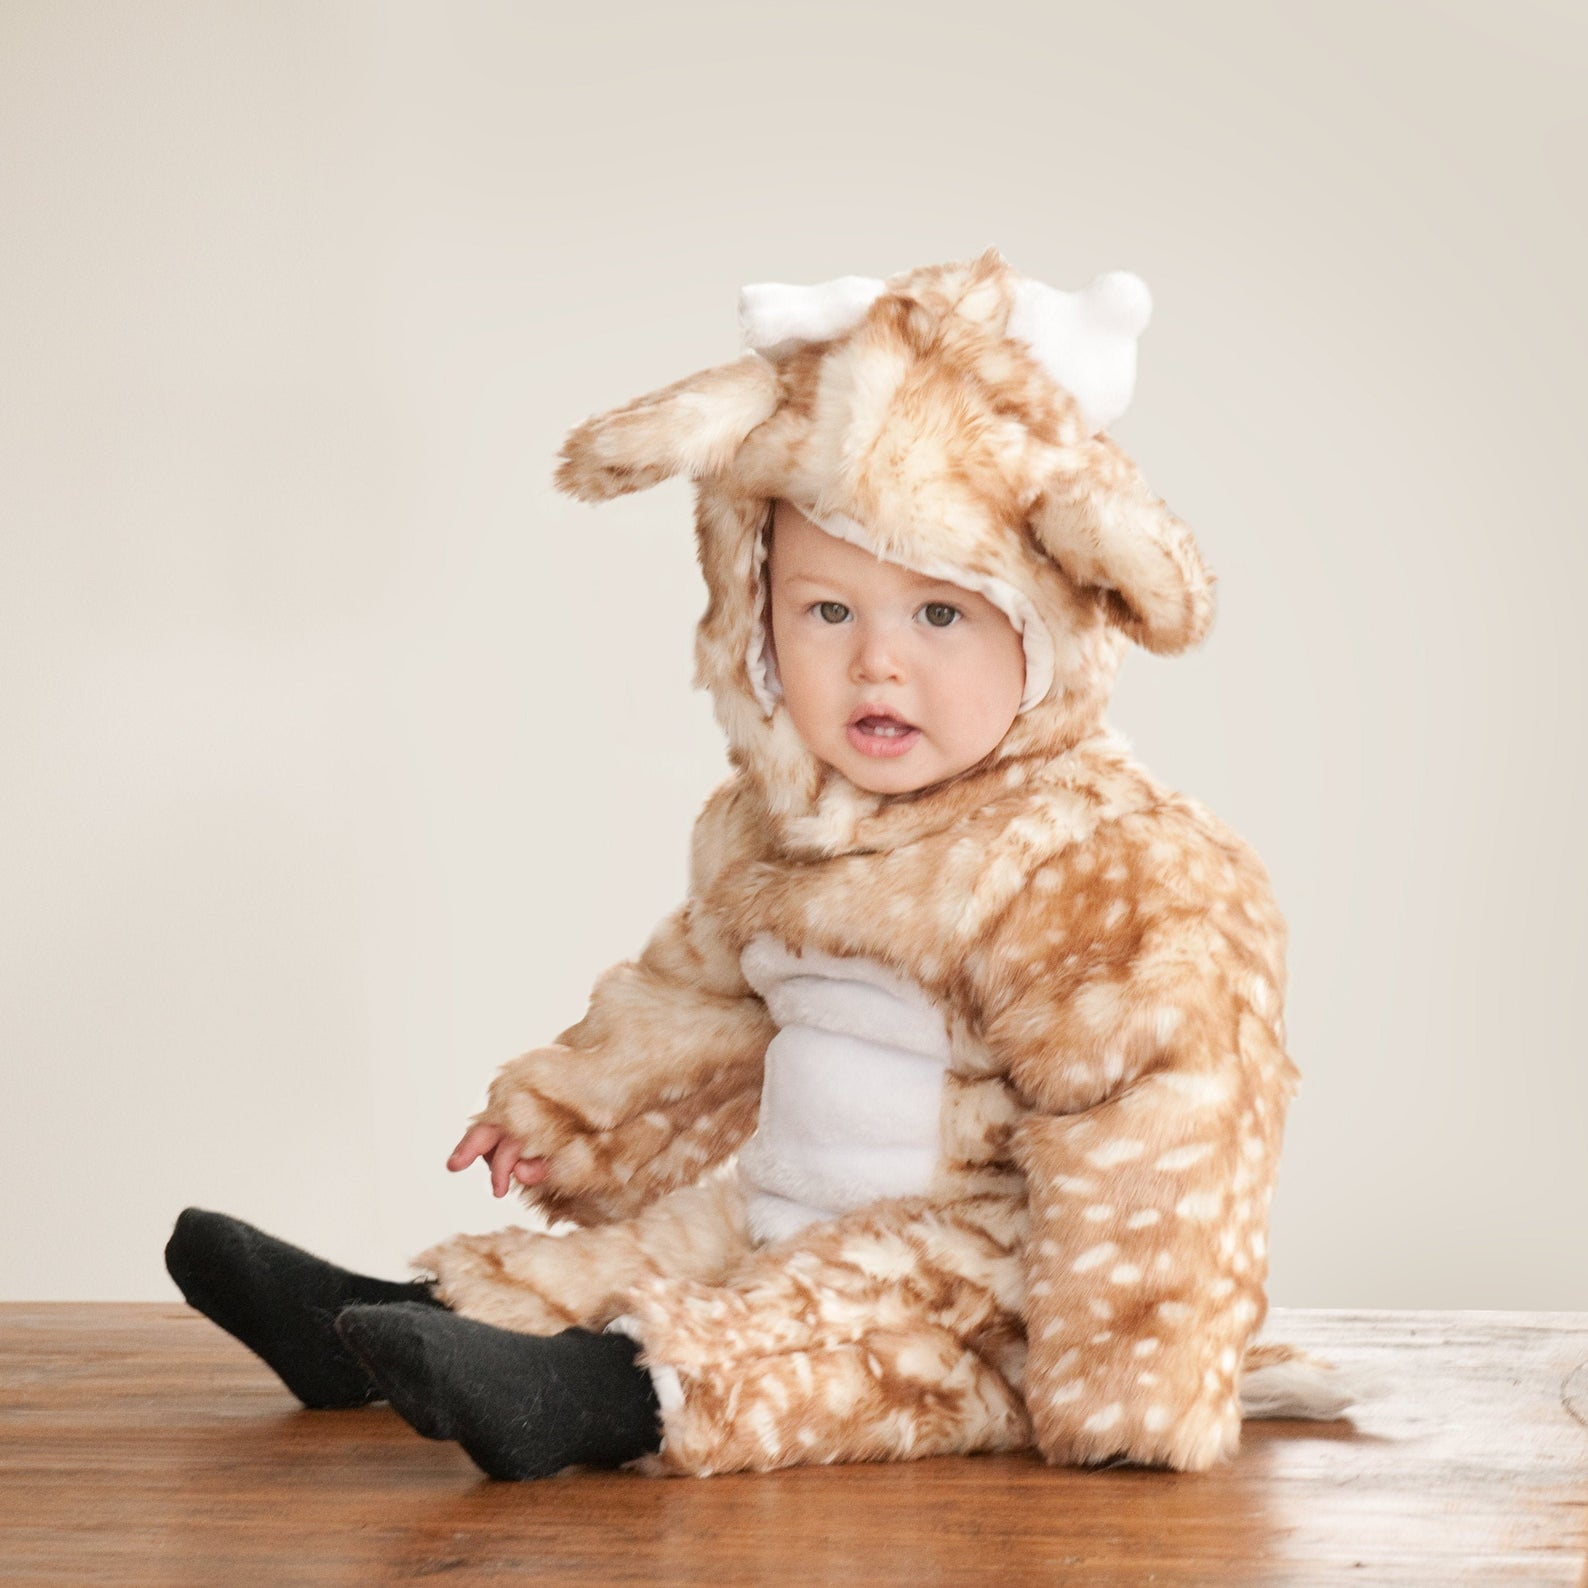 Baby Costume Halloween Costumes for Kids Sizes Baby to Toddler Super Cute  Baby Animal Deer (12-24 Months) 